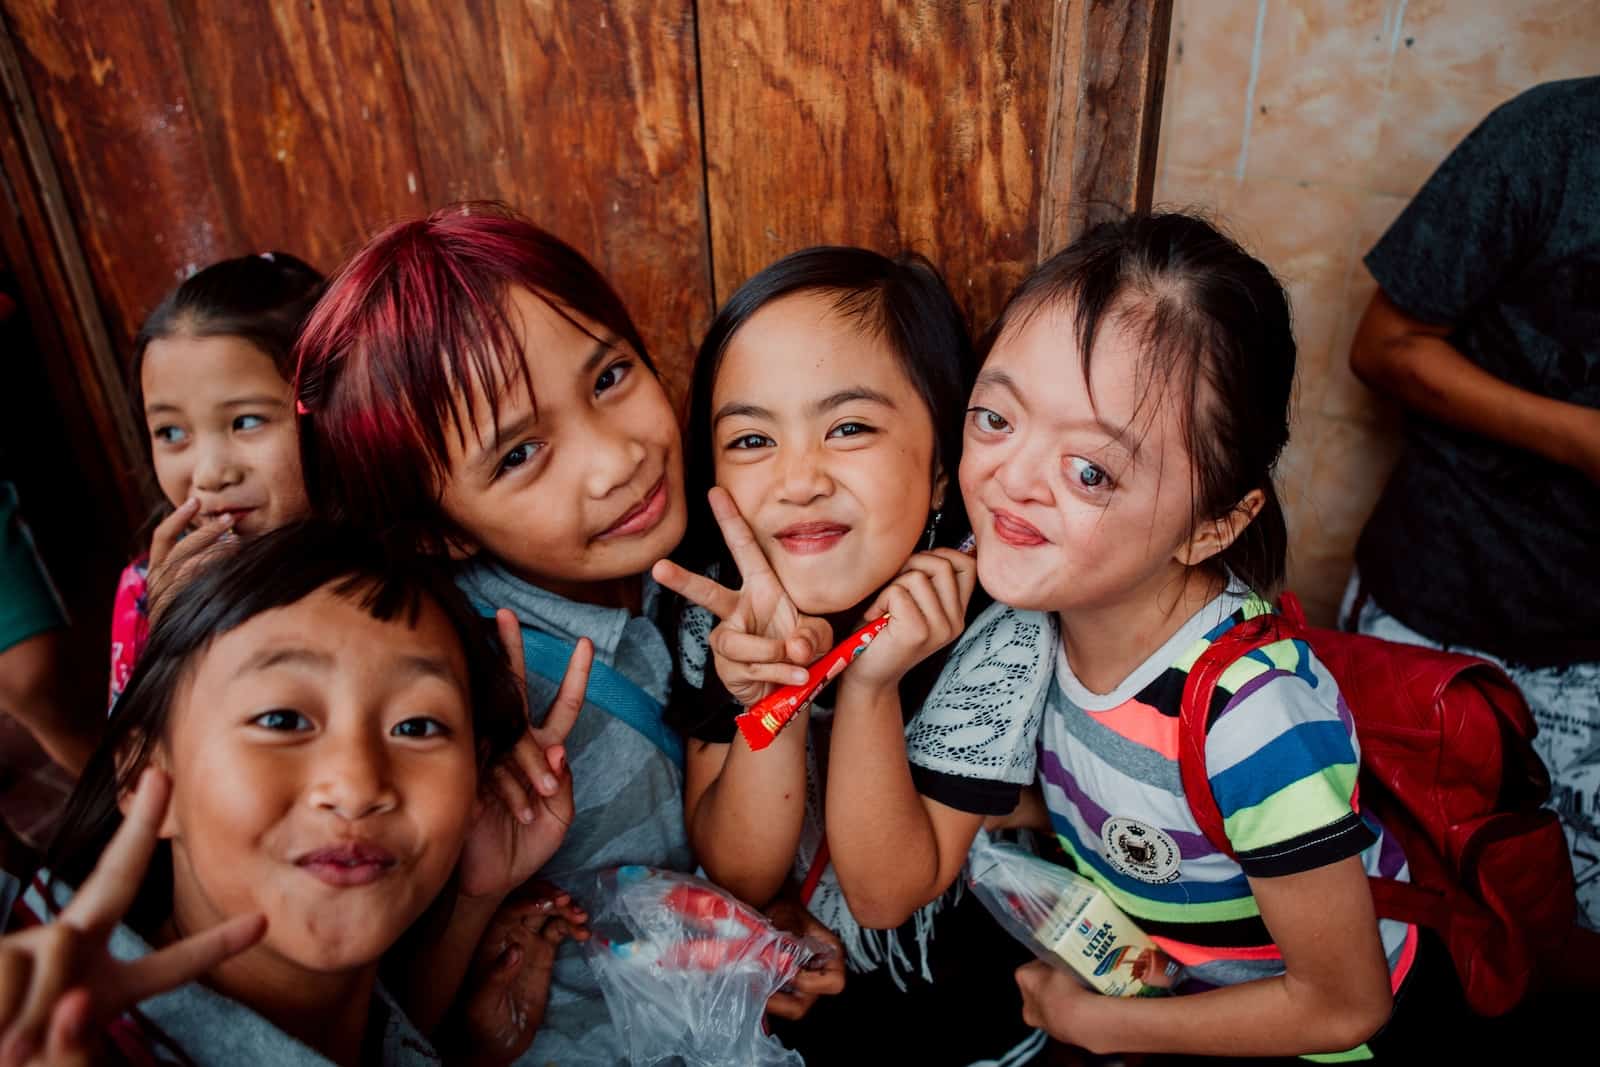 Four young girls, including one with Apert Syndrome, smile at the camera, making peace signs.